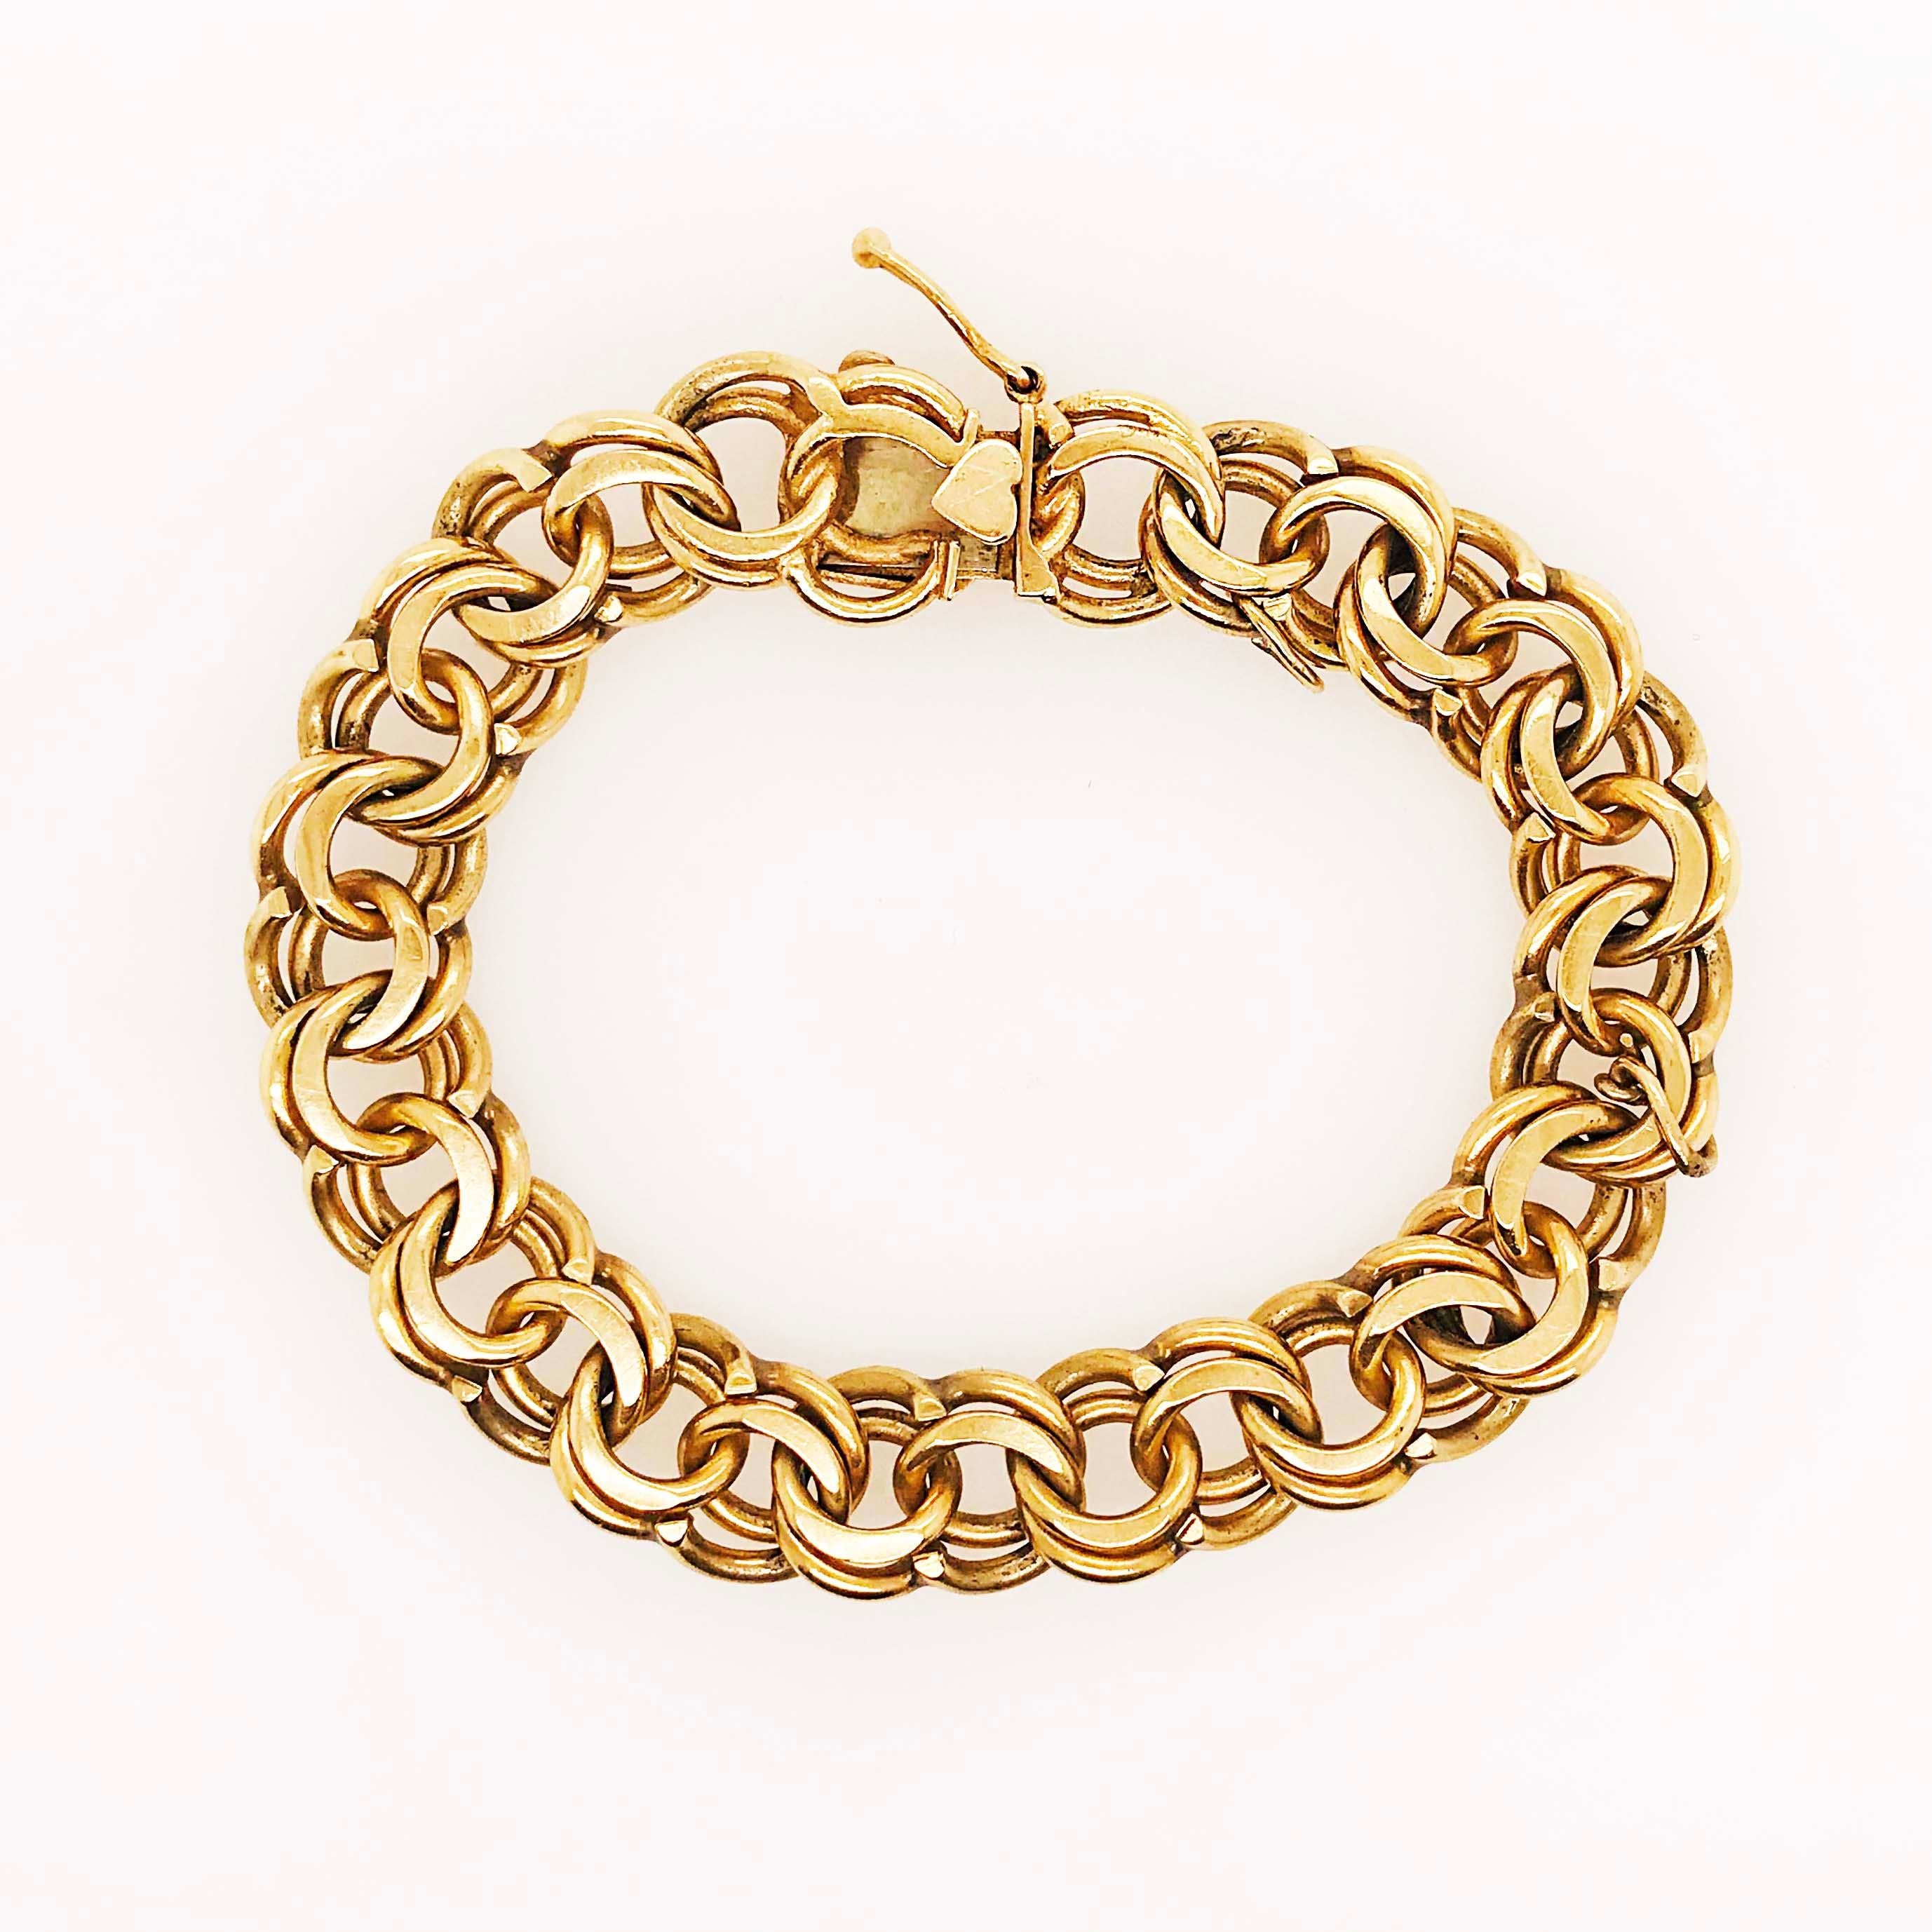 2020 MOST POPULAR FASHION JEWELRY!
This heavy chain bracelet is a custom, handmade item. The 11.75mm wide custom chain link bracelet has a double link design with handmade links that have been carefully crafted to work together in a symbiotic